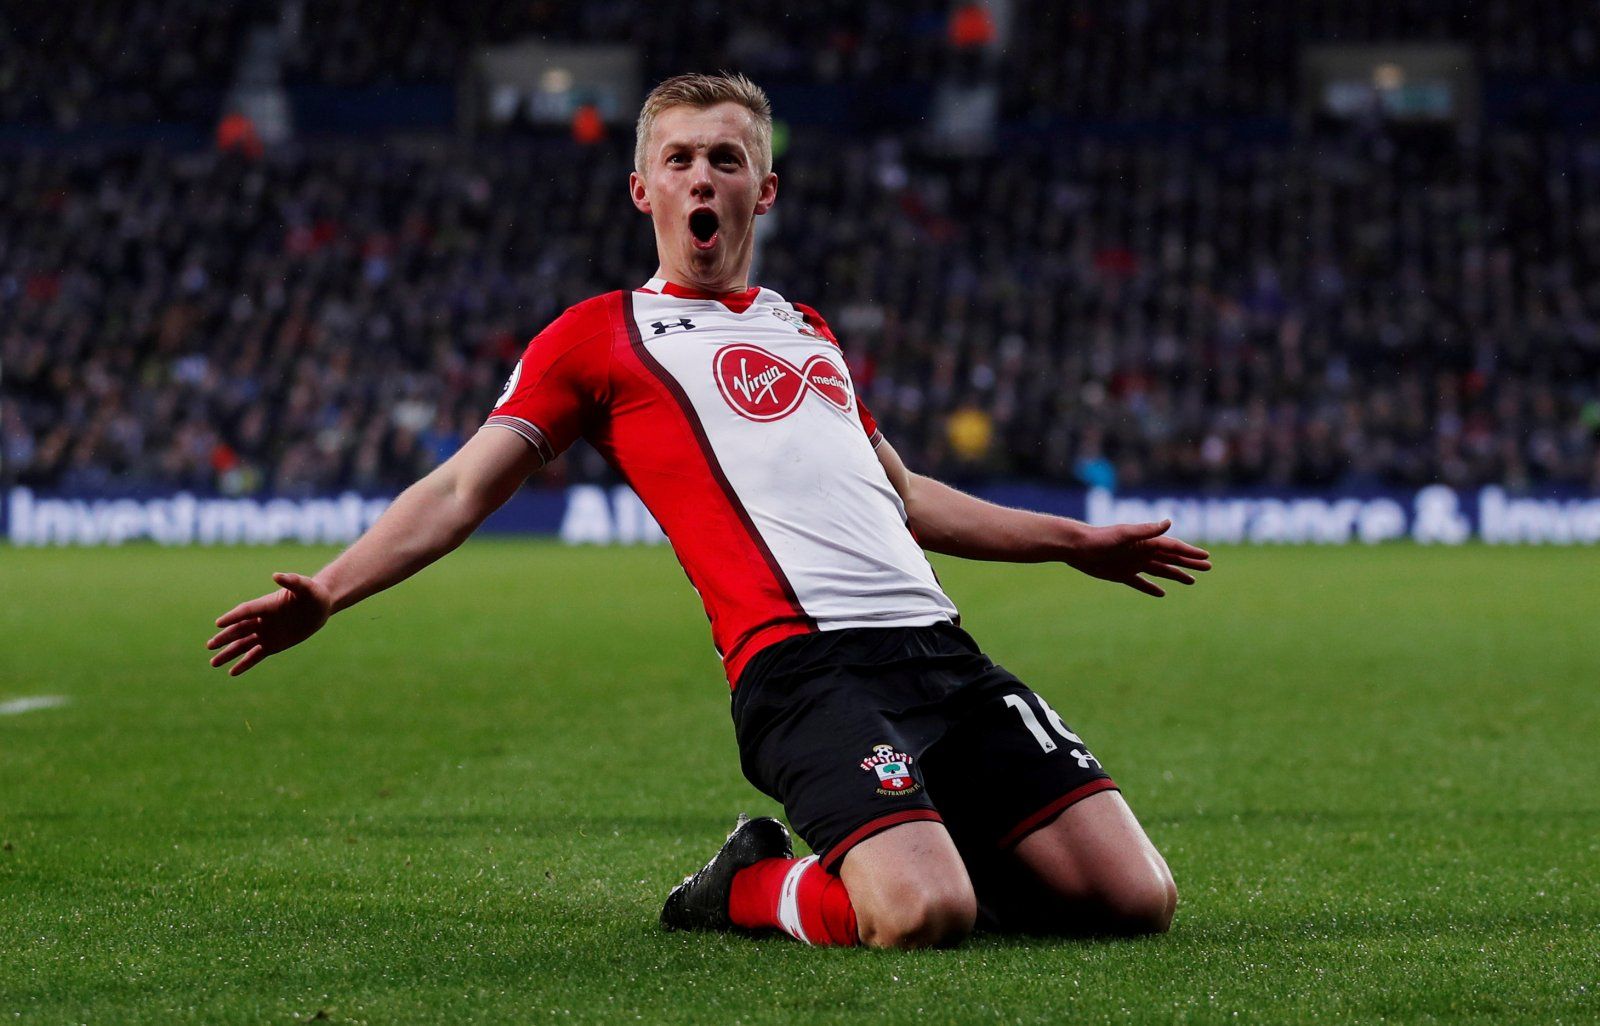 Exclusive: Windass questions why Ward-Prowse would leave Southampton for Aston Villa -Exclusive